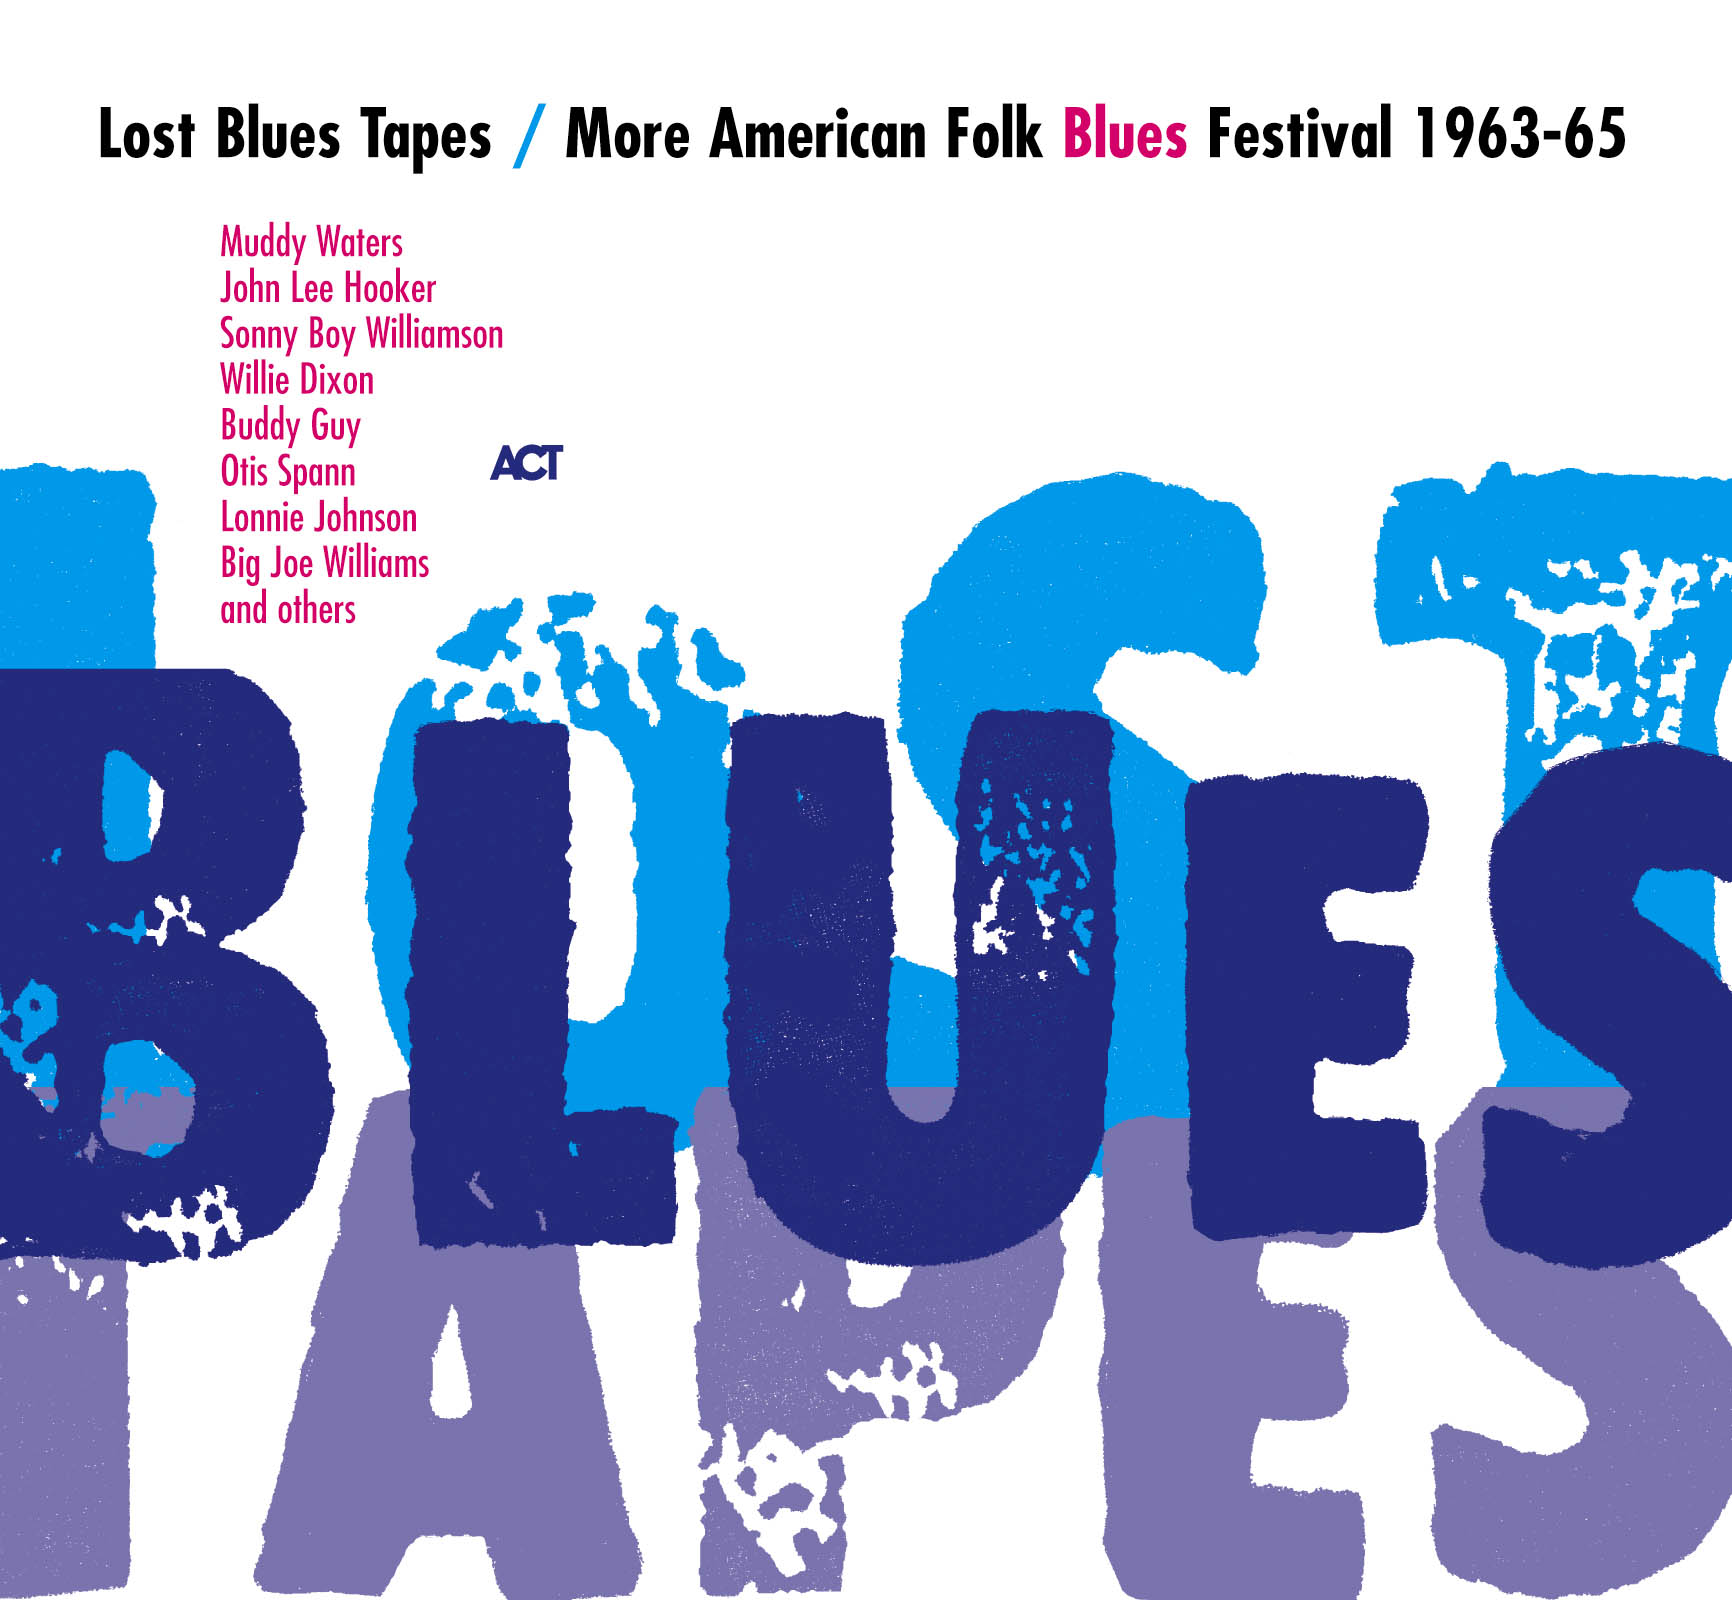 LOST BLUES TAPES